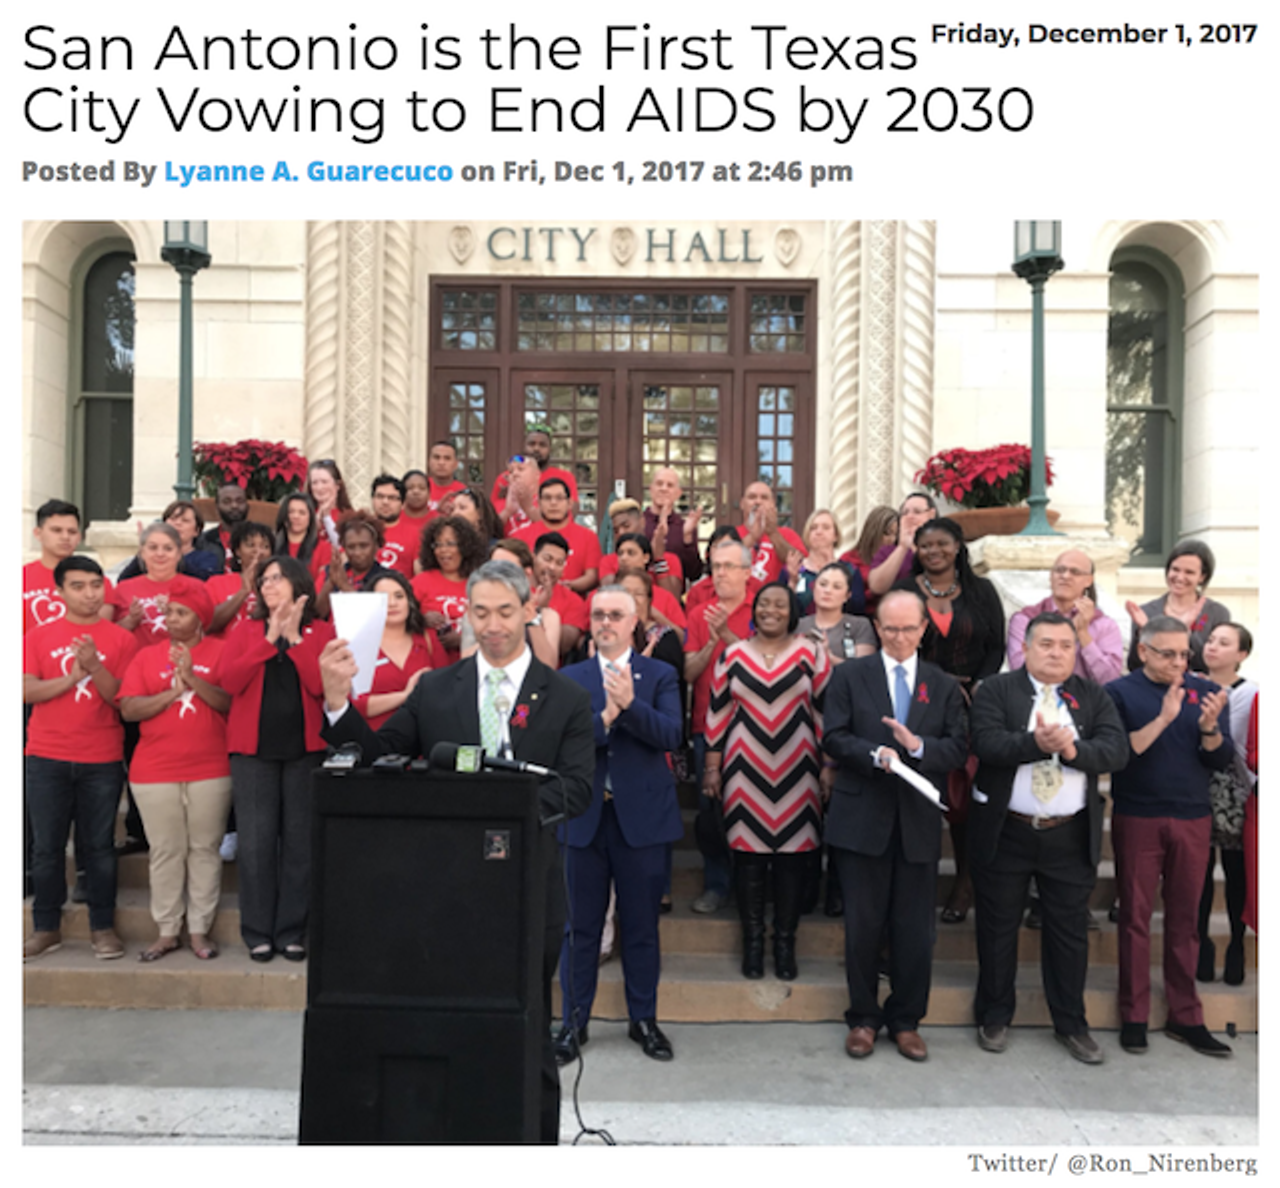 San Antonio became the first city in Texas vowing to end AIDS by 2030. San Antonio was the 14th city to join this initiative called the Fast Track Cities. Read more.